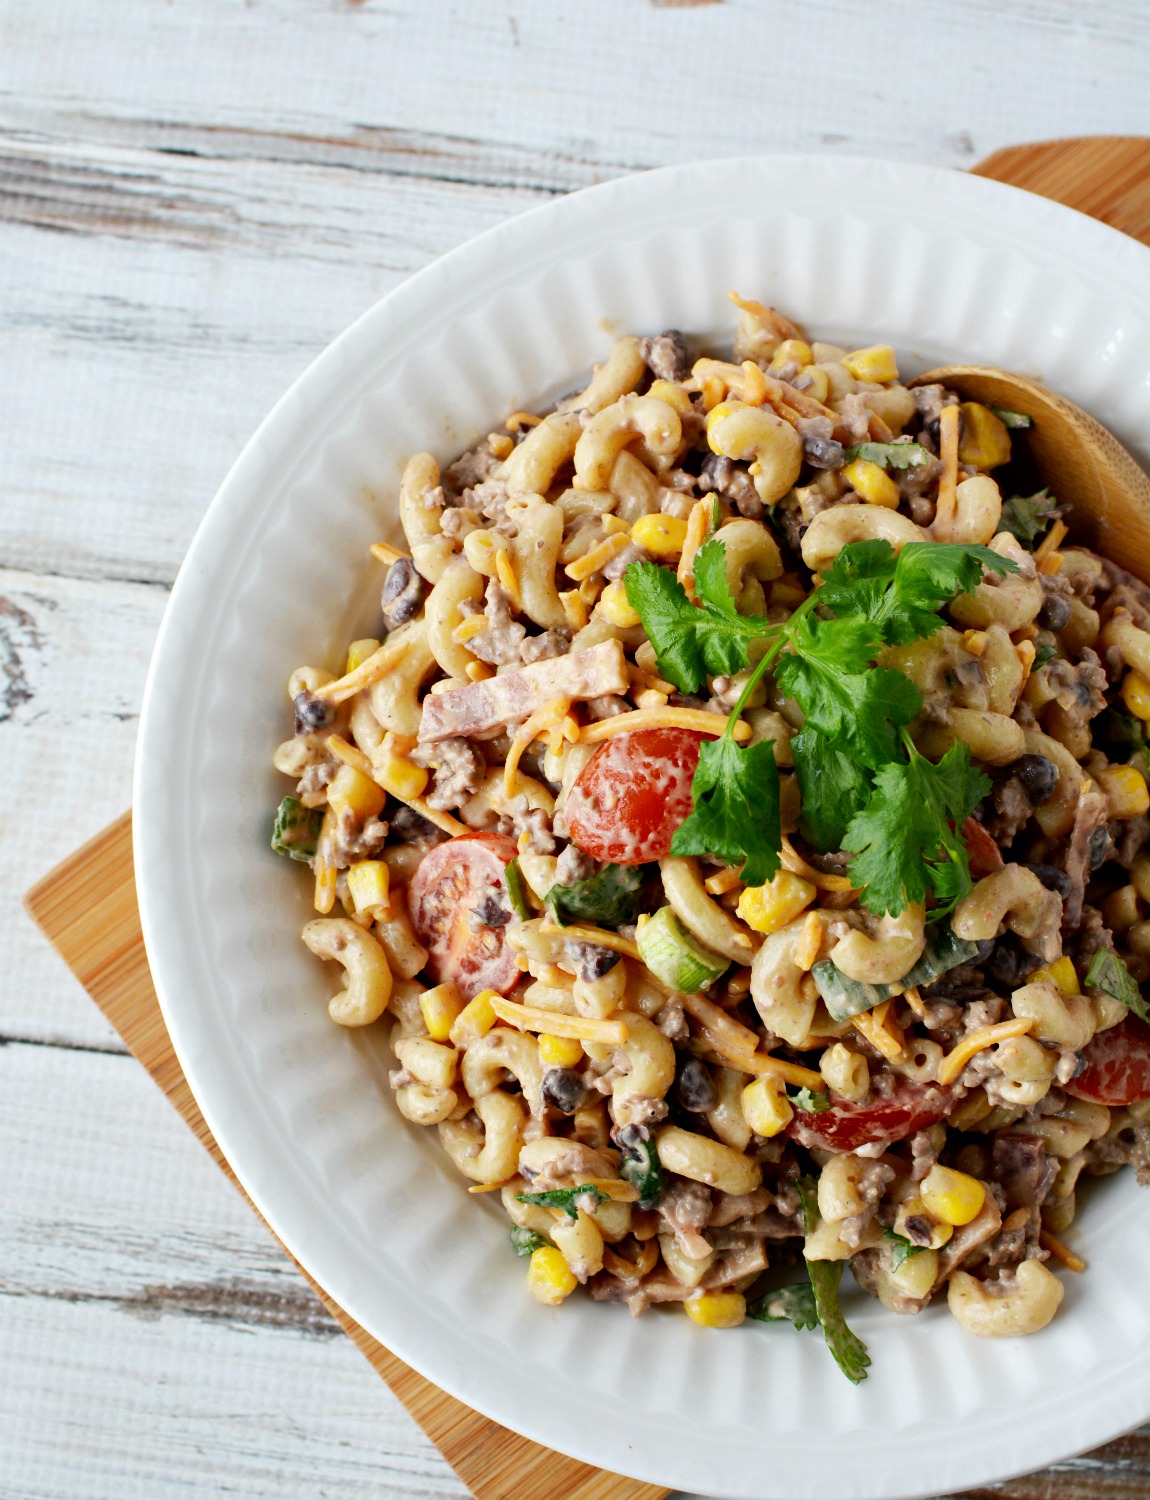 Cowboy pasta made with ground beef